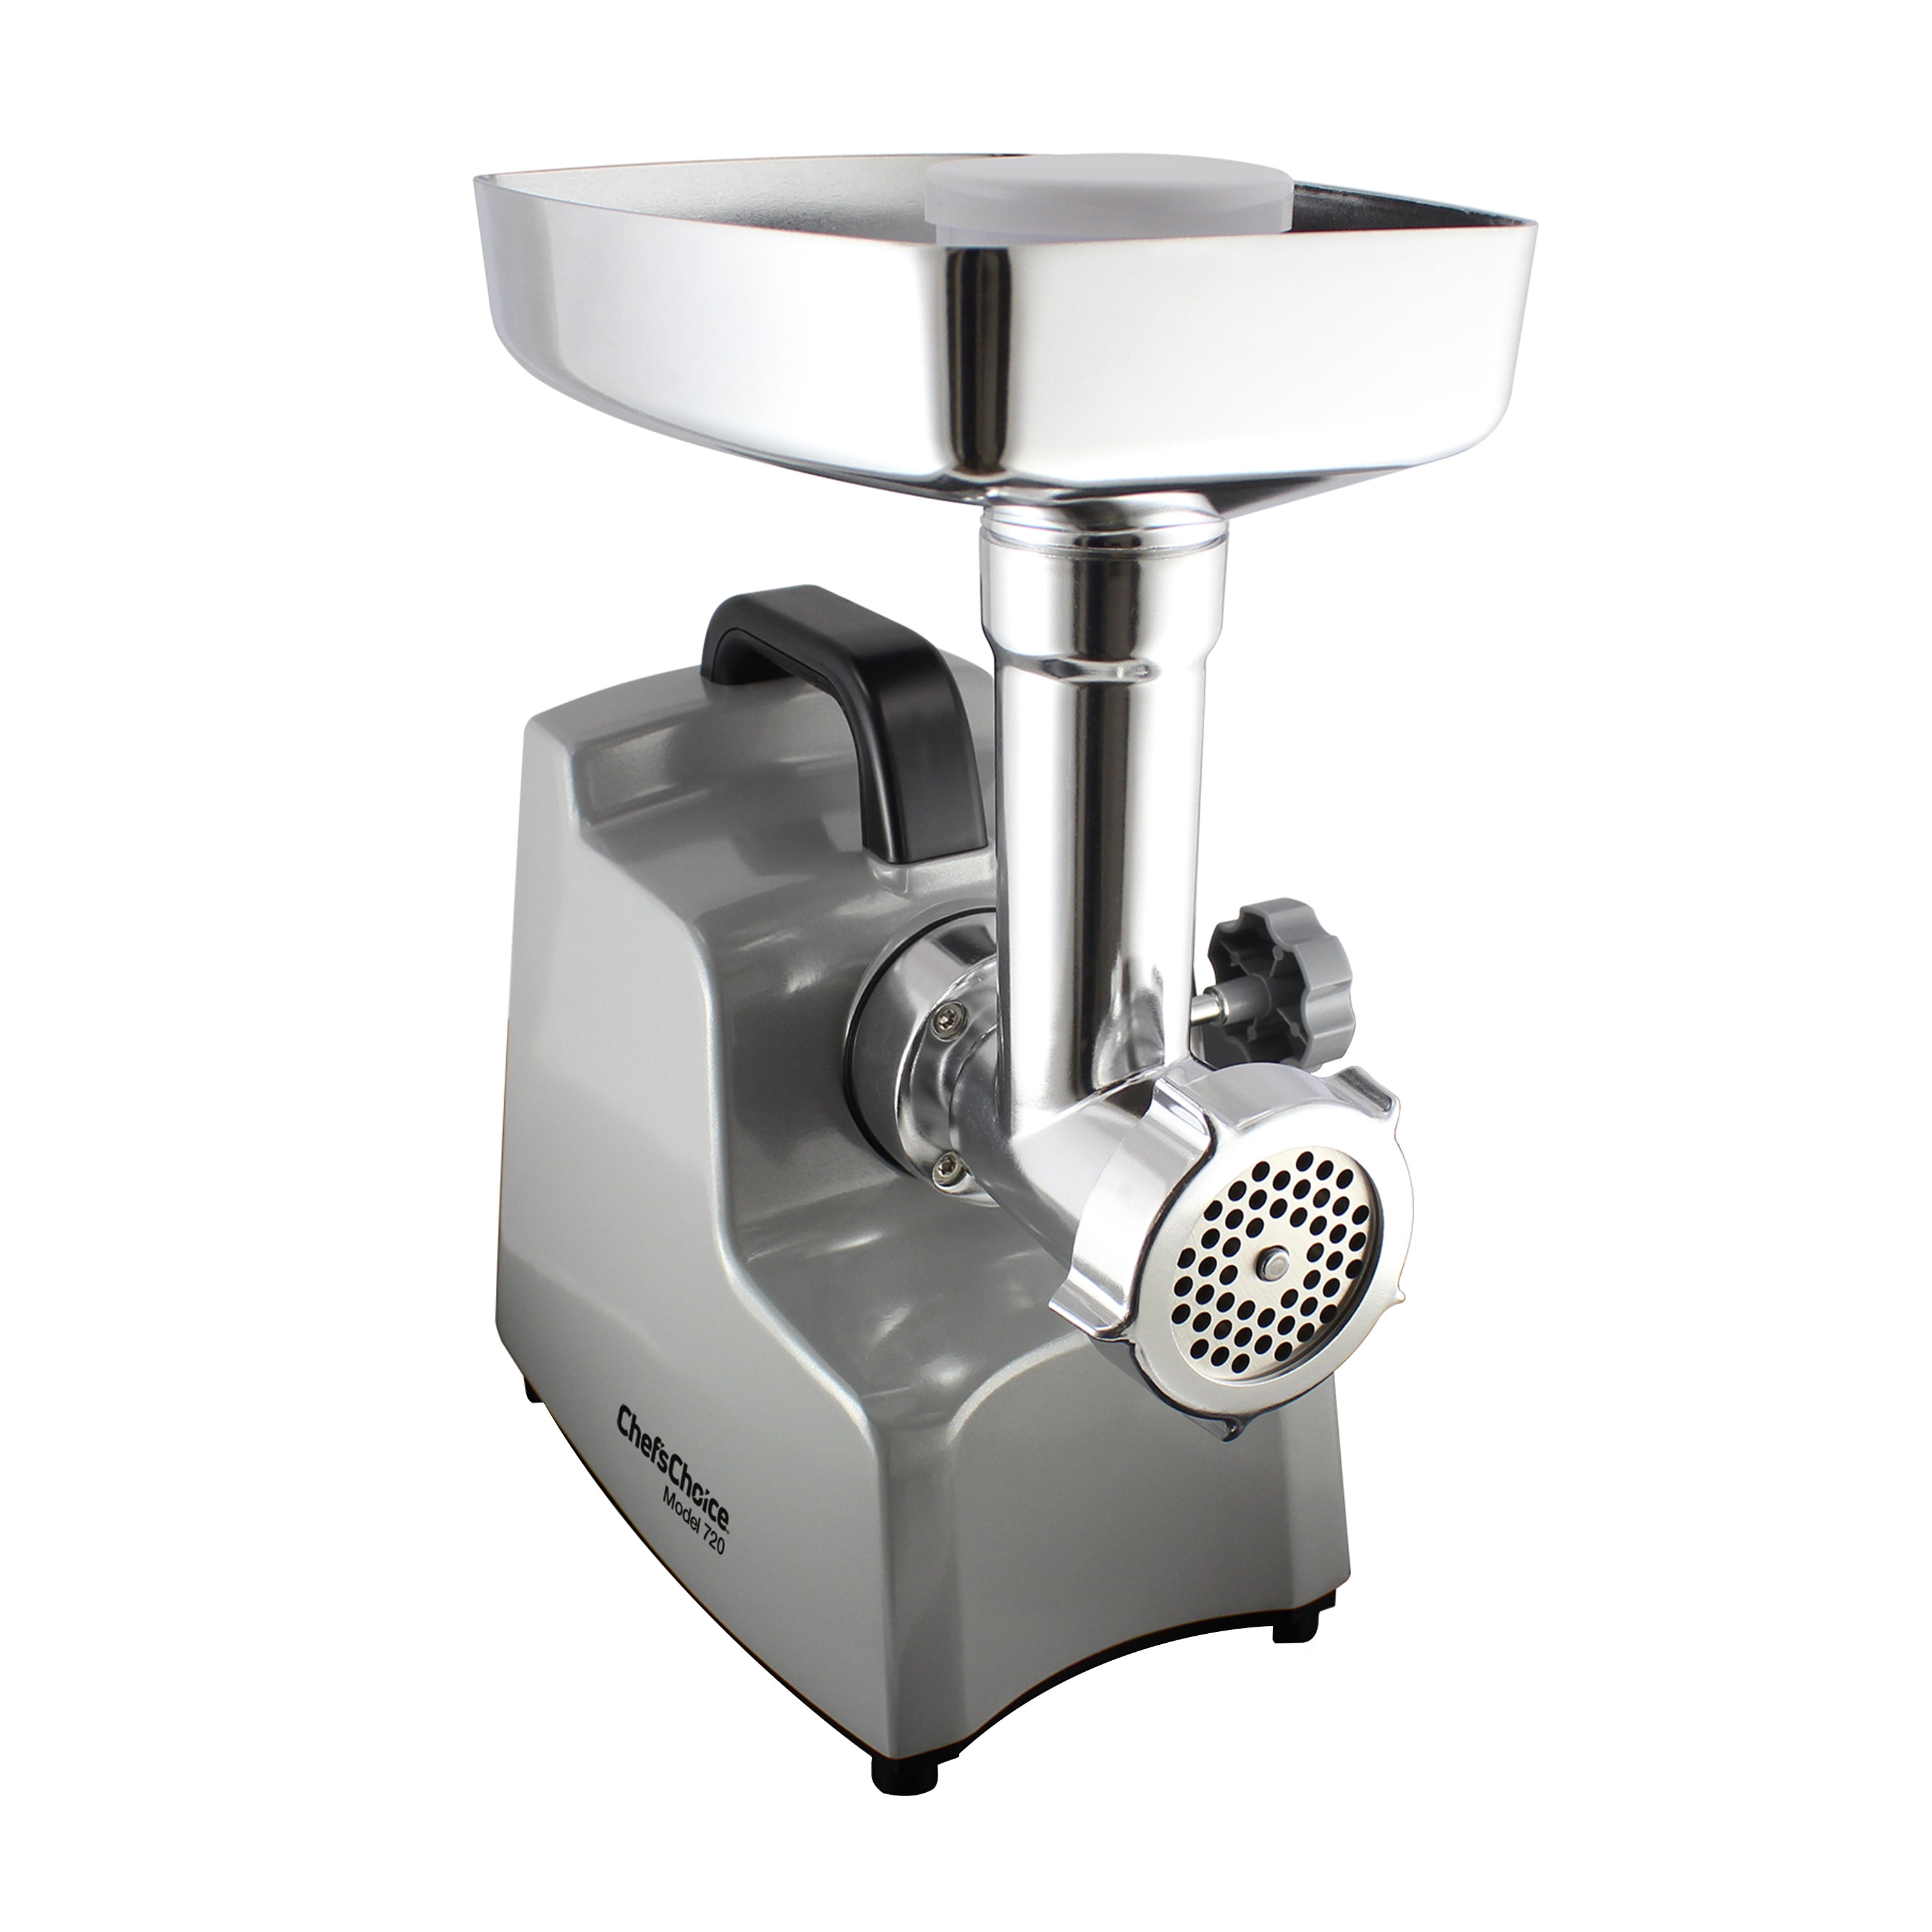 American meat grinder recommendation